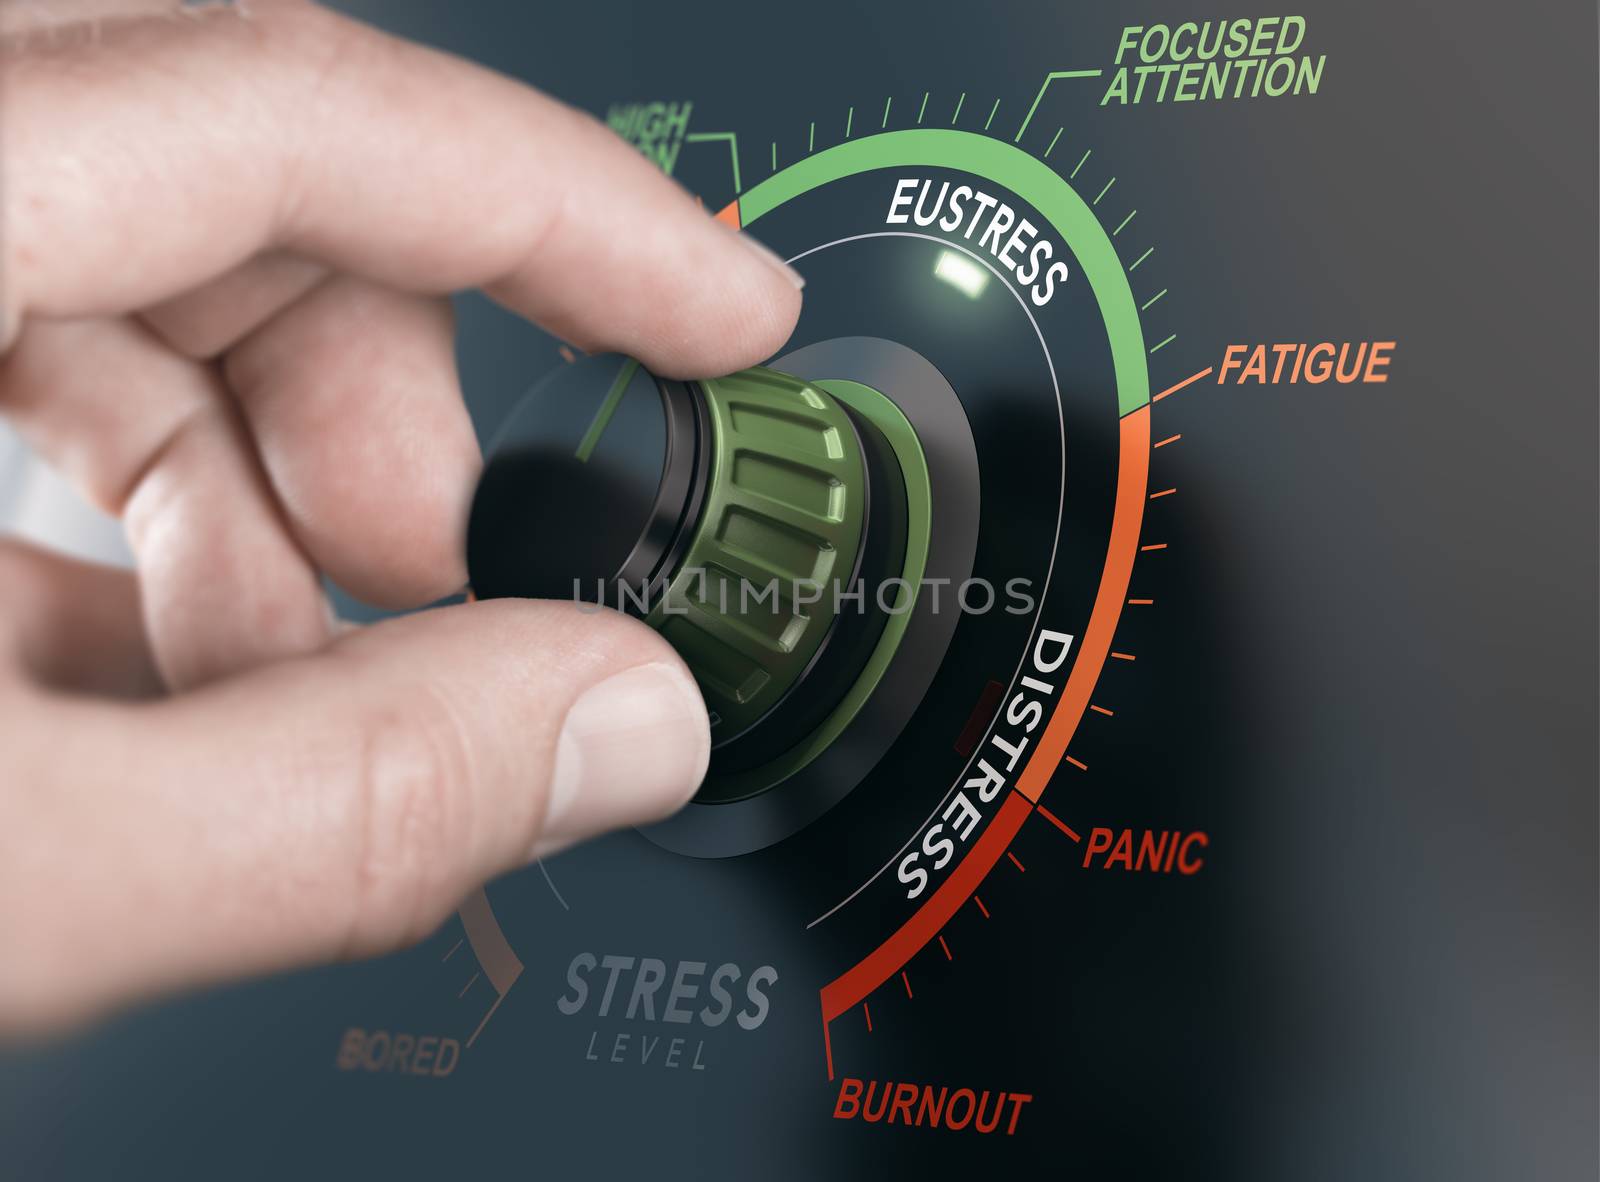 Hand turning a switch to manage stress level and setting it to eustress instead of distress. Composite between a photography and a 3D background.